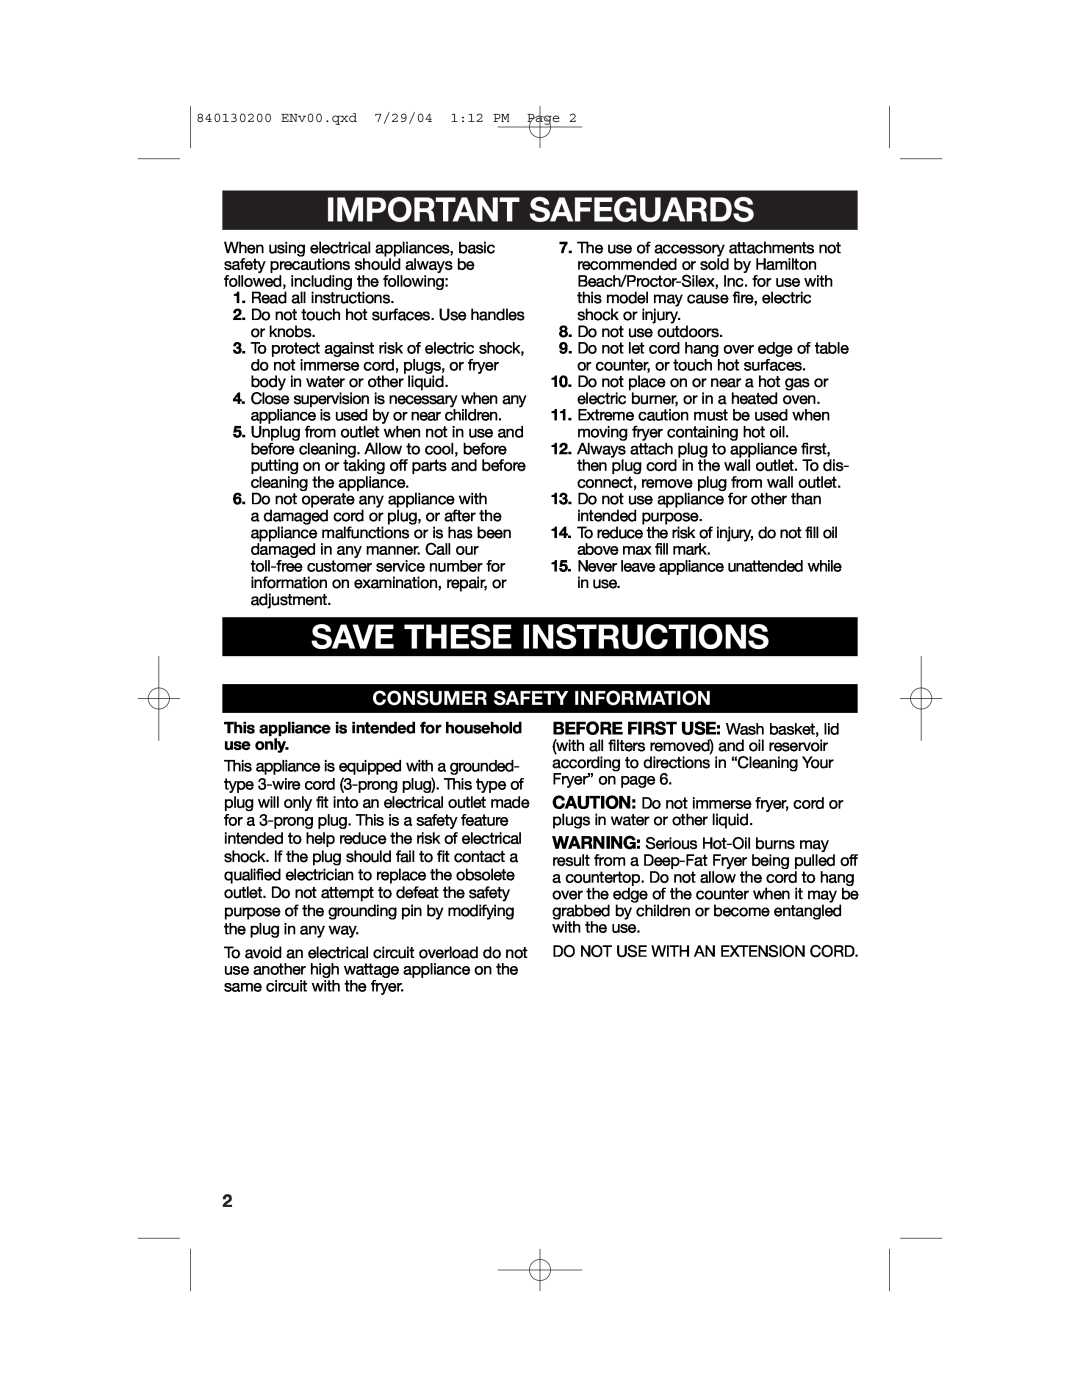 Hamilton Beach 35020C manual Important Safeguards, Save These Instructions, Consumer Safety Information 